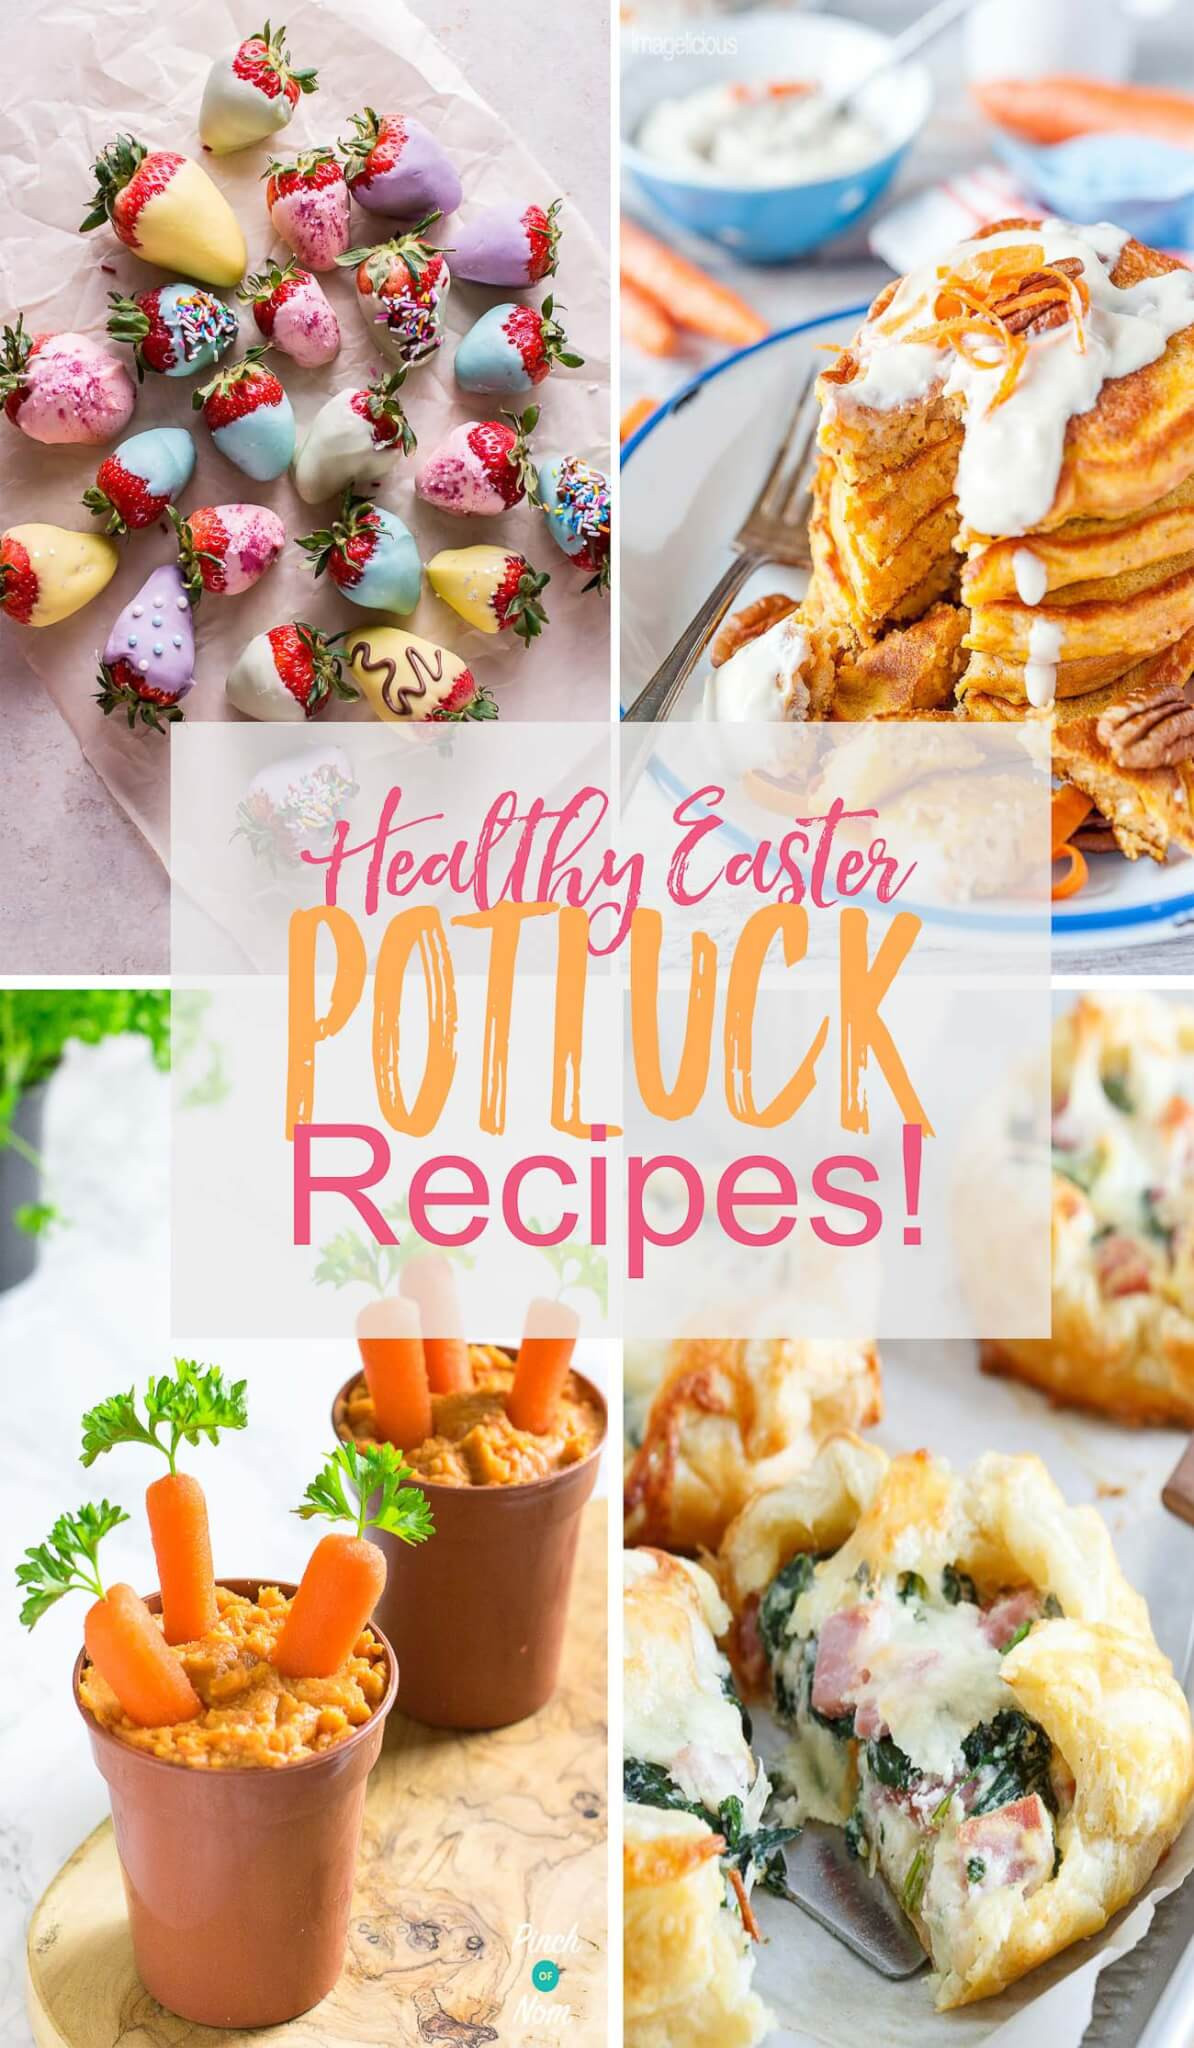 Healthy Easter Dinner Recipes
 12 Healthy Easter Brunch Potluck Recipes The Girl on Bloor